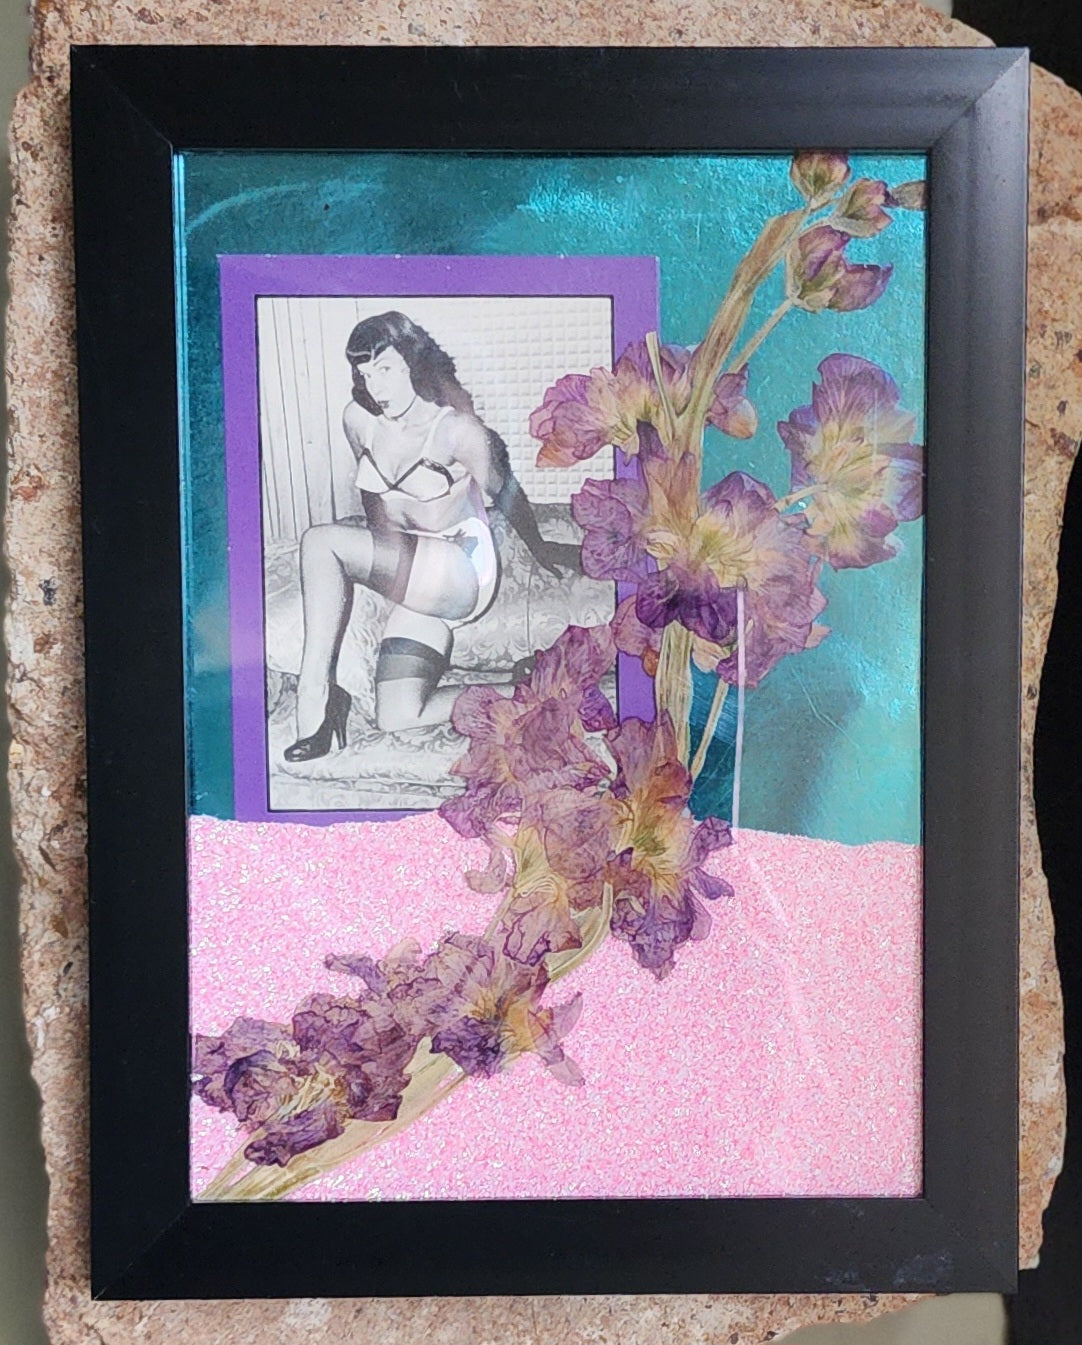 Framed Vintage Bettie Page Trading Card & Pressed Flower Art - 5 x 7